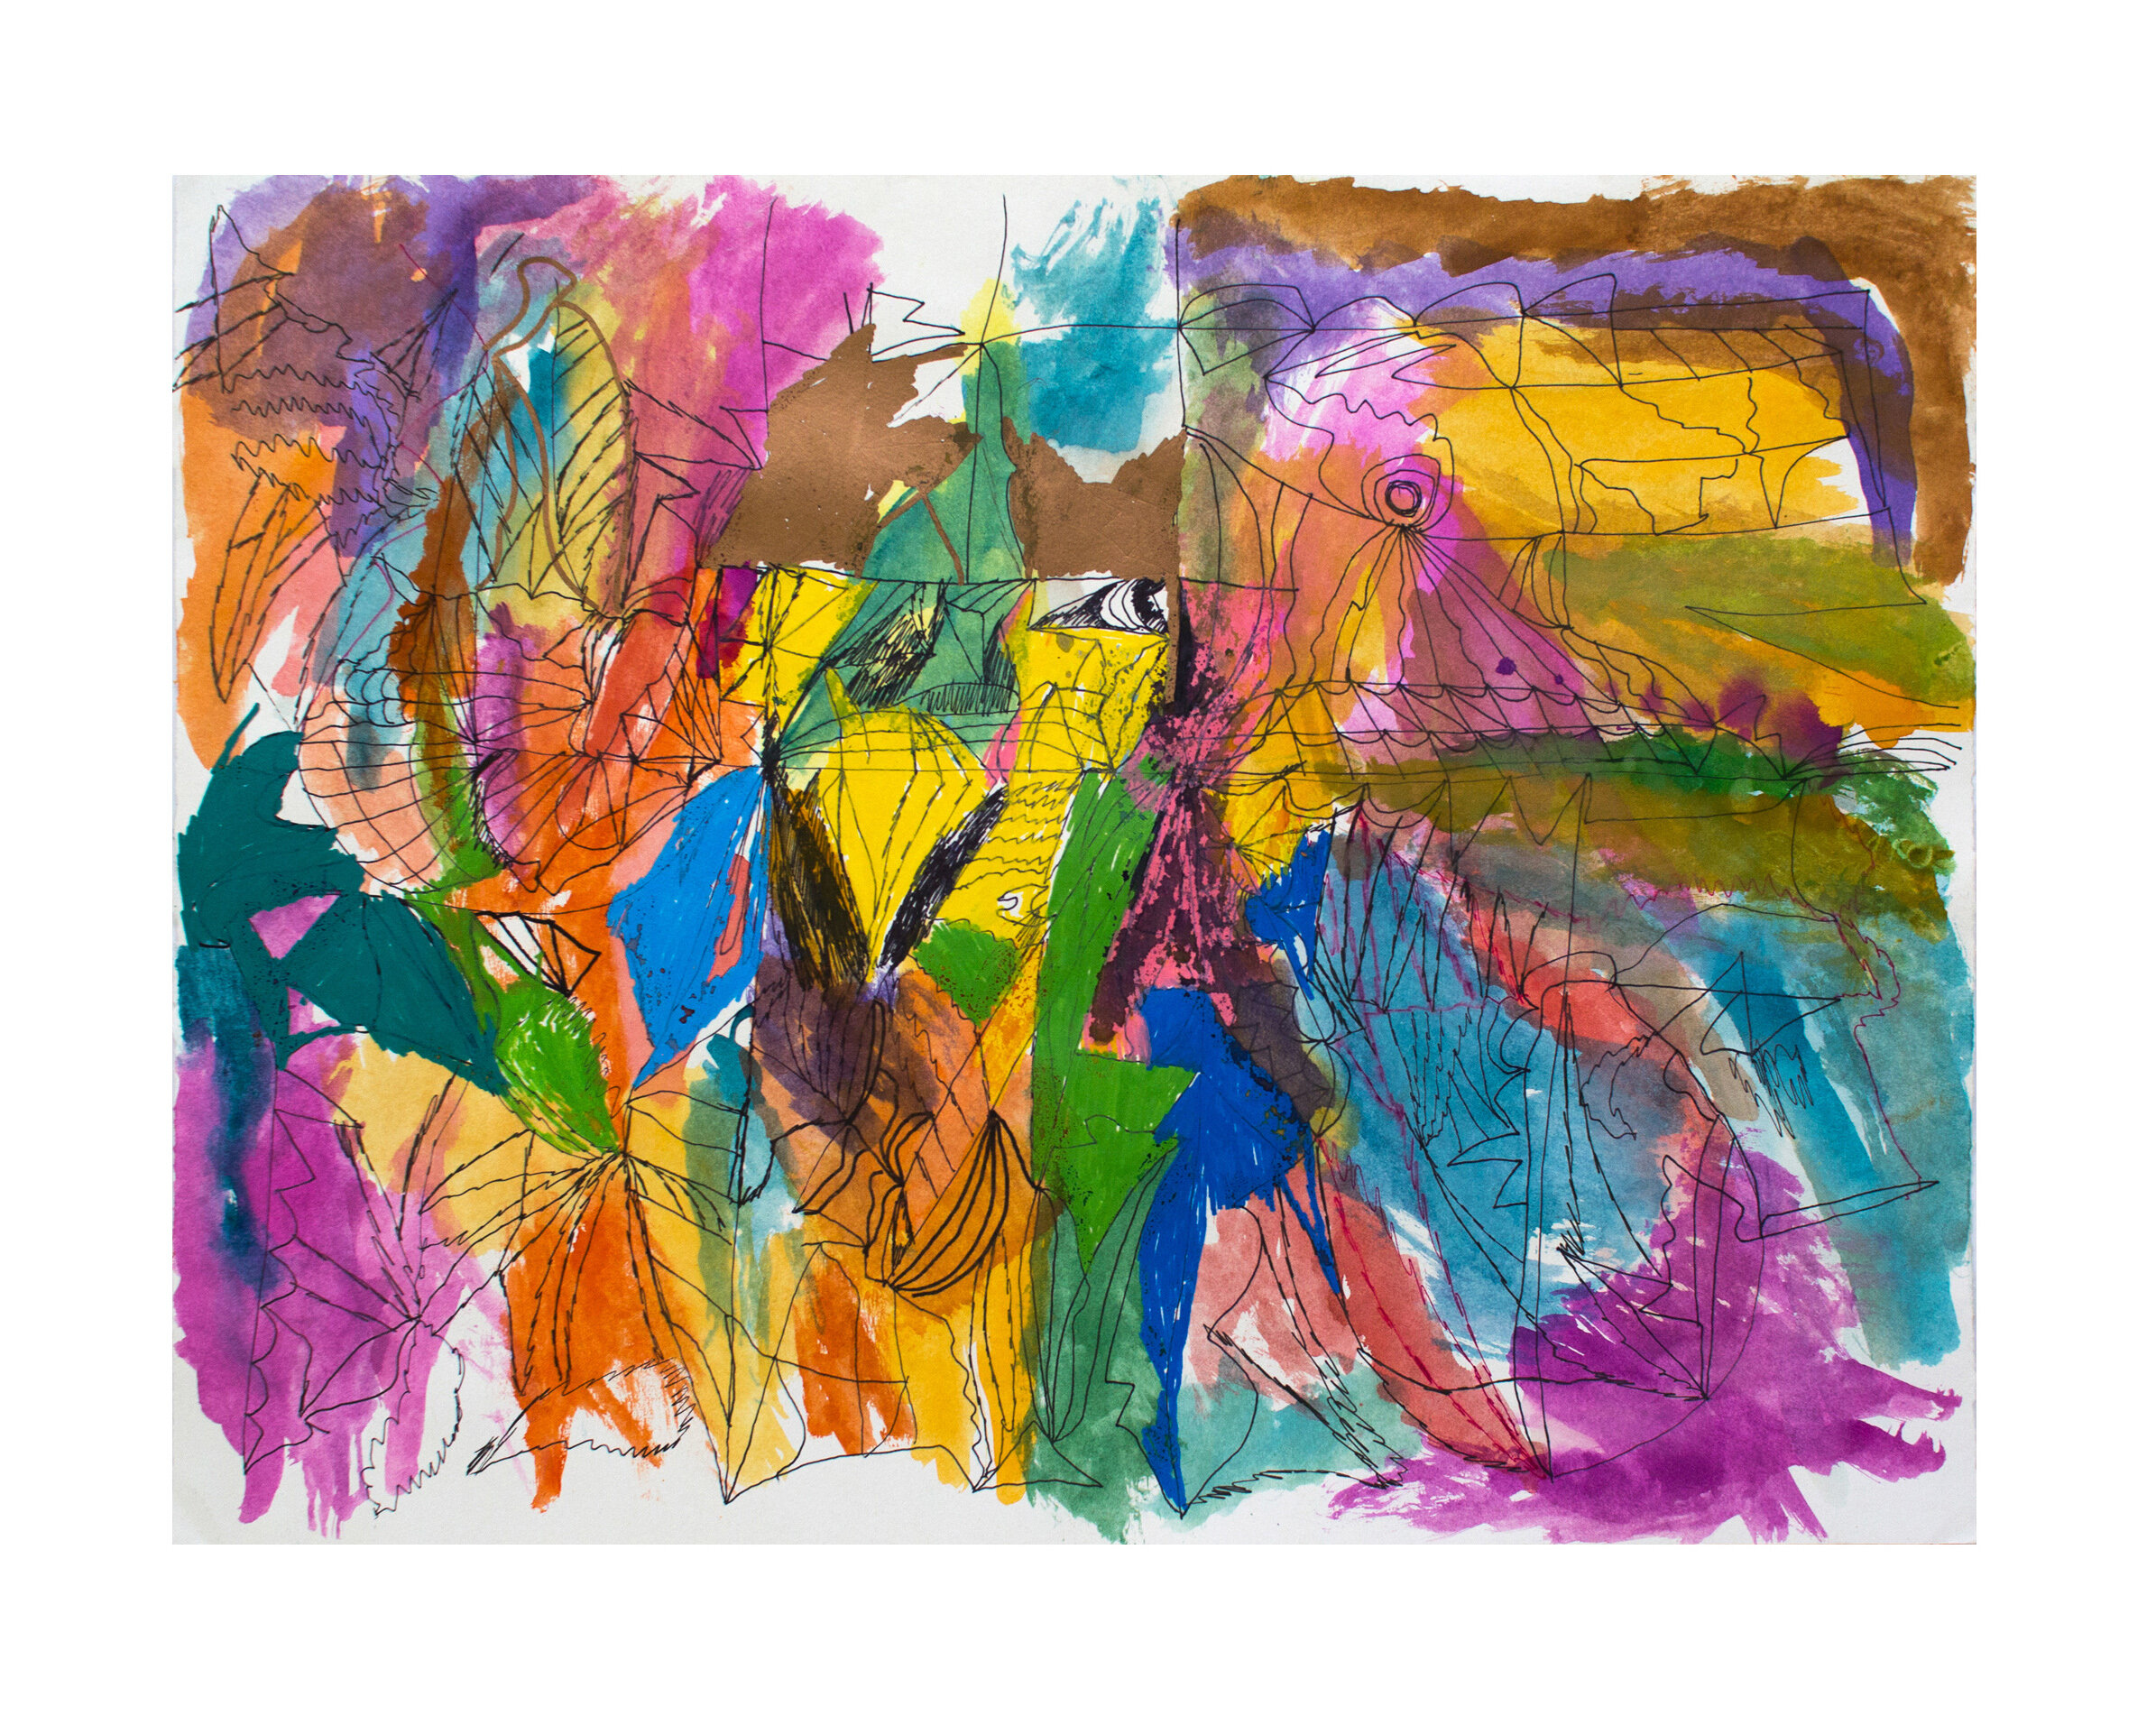 Joseph Alef, Untitled (JA 64), ND, Watercolor and ink on paper, 20 x 26.125 inches (Copy)